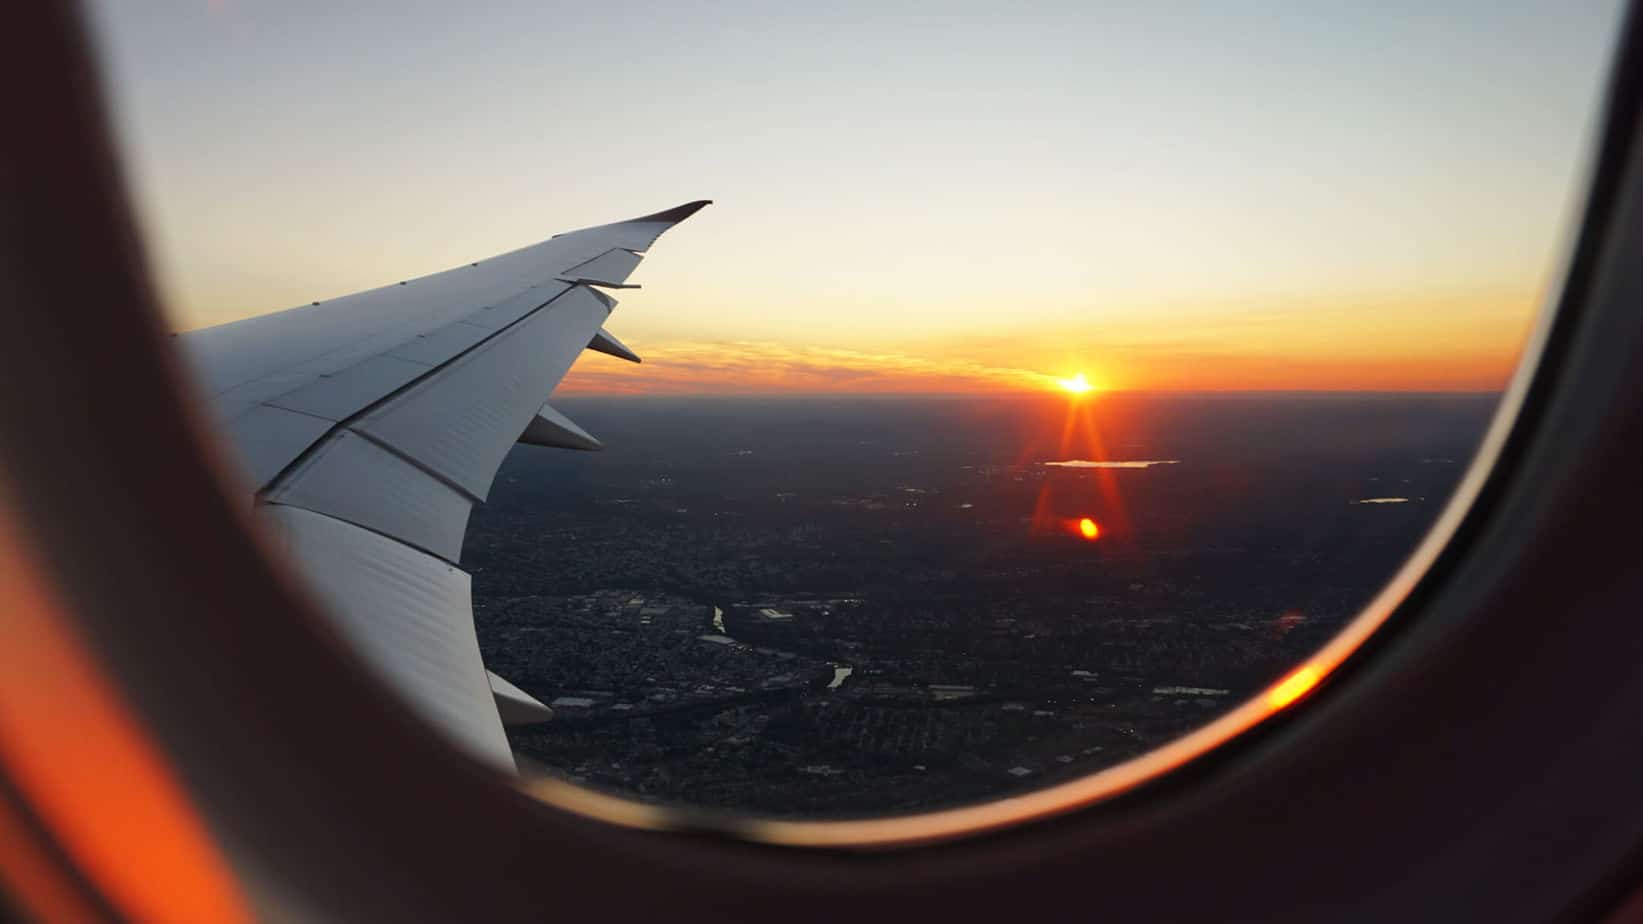 Sunset from a plane window on a flight